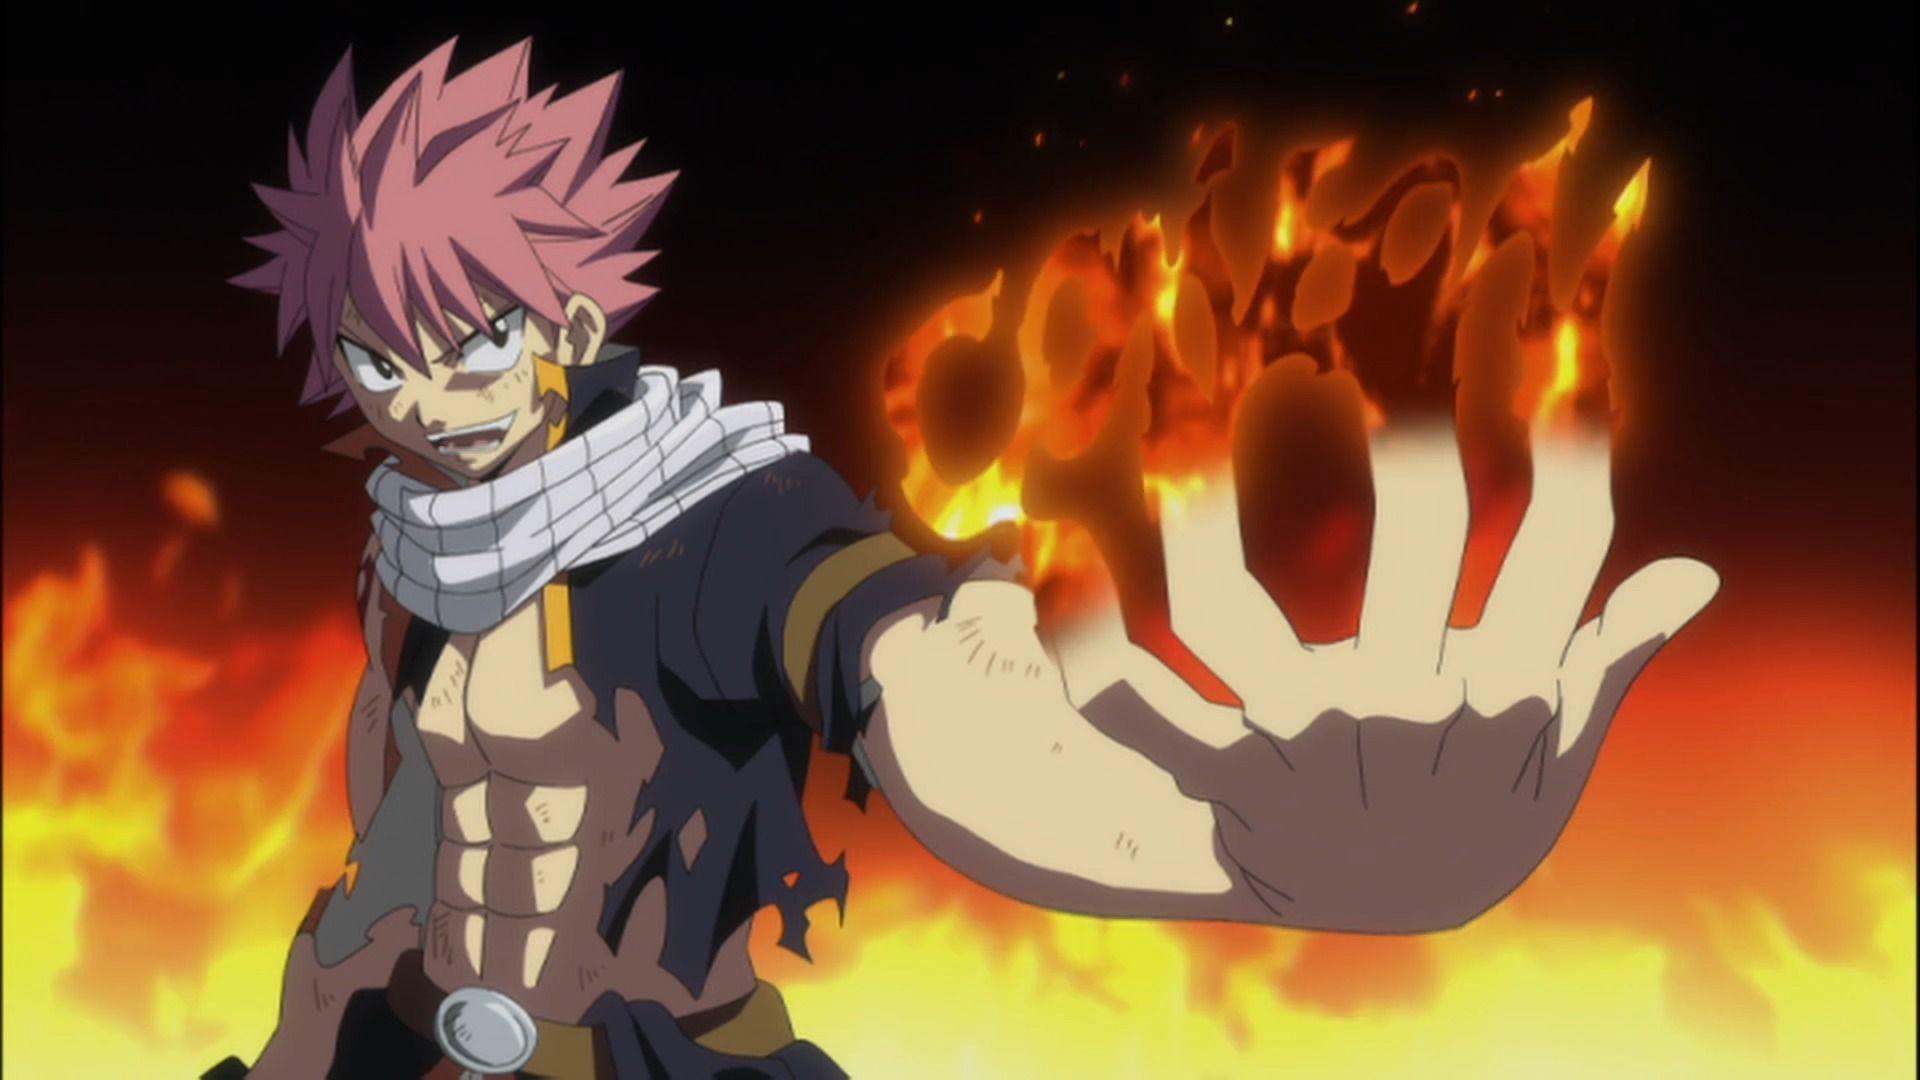 DEATH ANALYSIS: The Pink Haired, Hot Headed, Fire Dragon Slayer